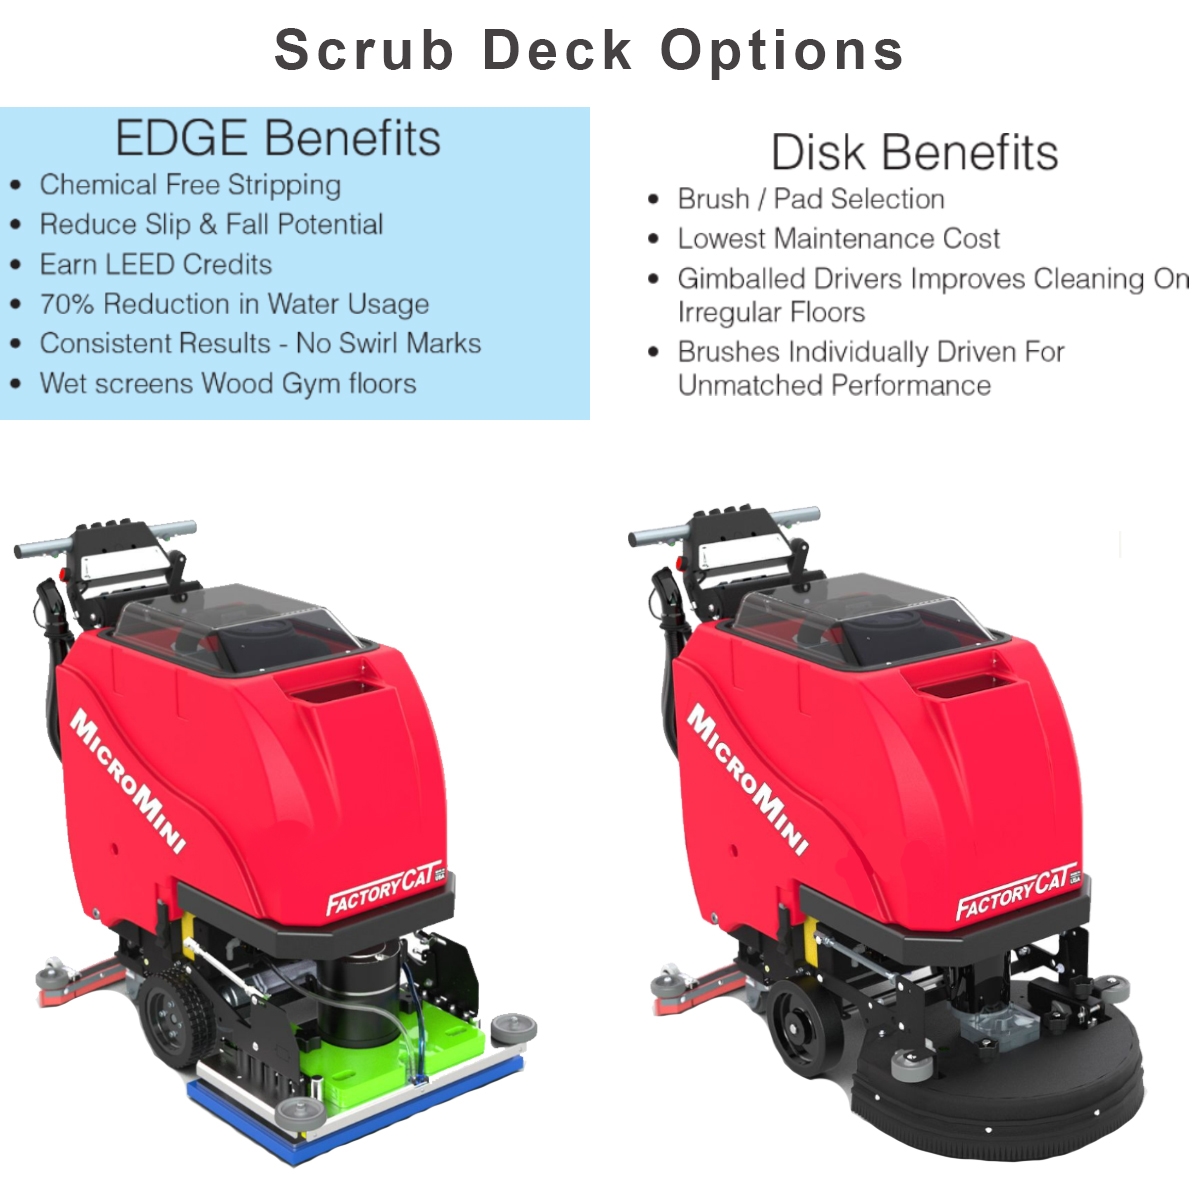 your operators will find the MICROMINI Floor Scrubber Dryer easy to maneuver into tight areas, and simple to service.